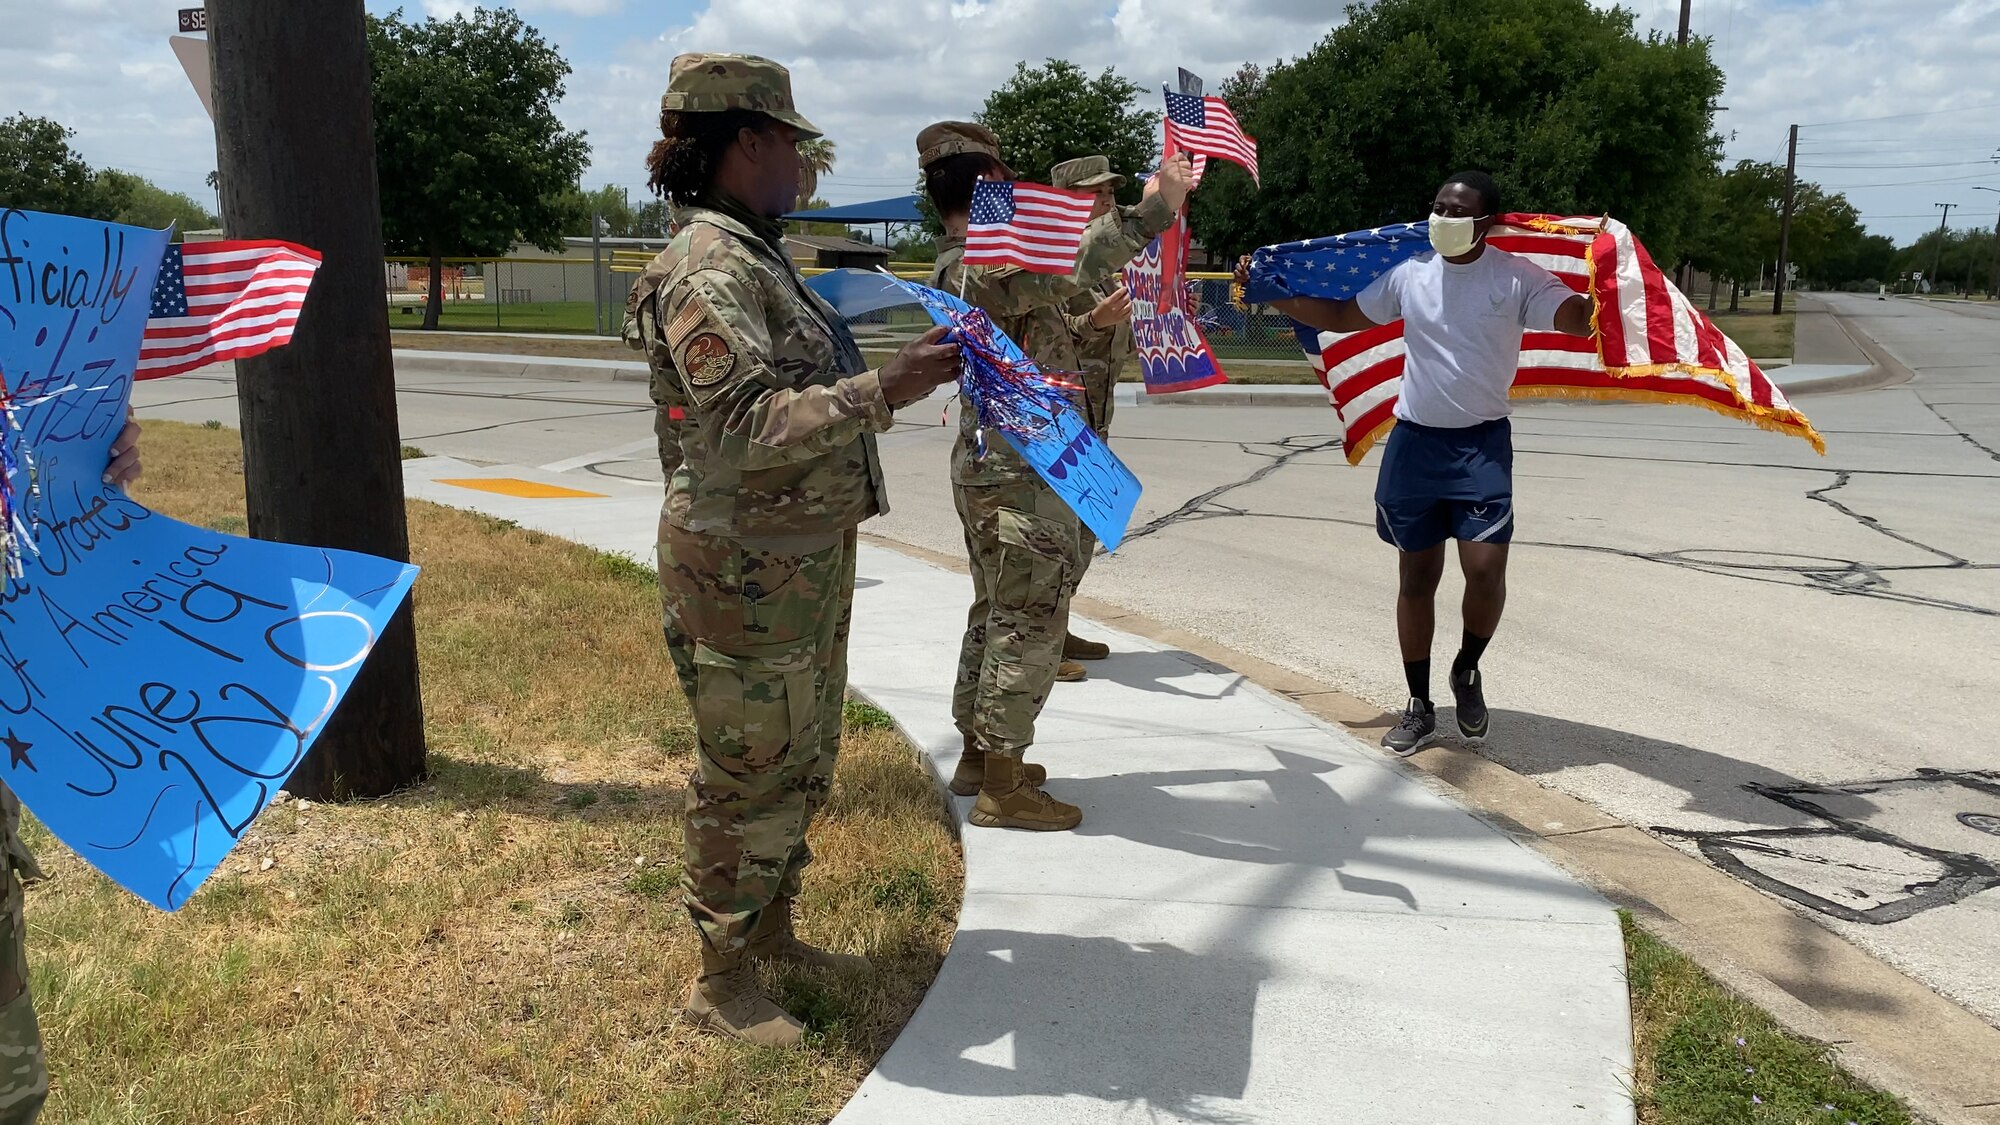 Members of the 47th Operations Support Squadron hold up signs and congratulate Airman 1st Class Gaddiel Acquaah, a 47th Operations Support Squadron aerospace physiology technician, on obtaining his U.S. citizenship at Laughlin Air Force Base, Texas, June 26, 2020. Acquaah’s leadership and flight planned the drive-by celebration to mitigate the spread of COVID-19. (U.S. Air Force photo by Senior Airman Marco A. Gomez)